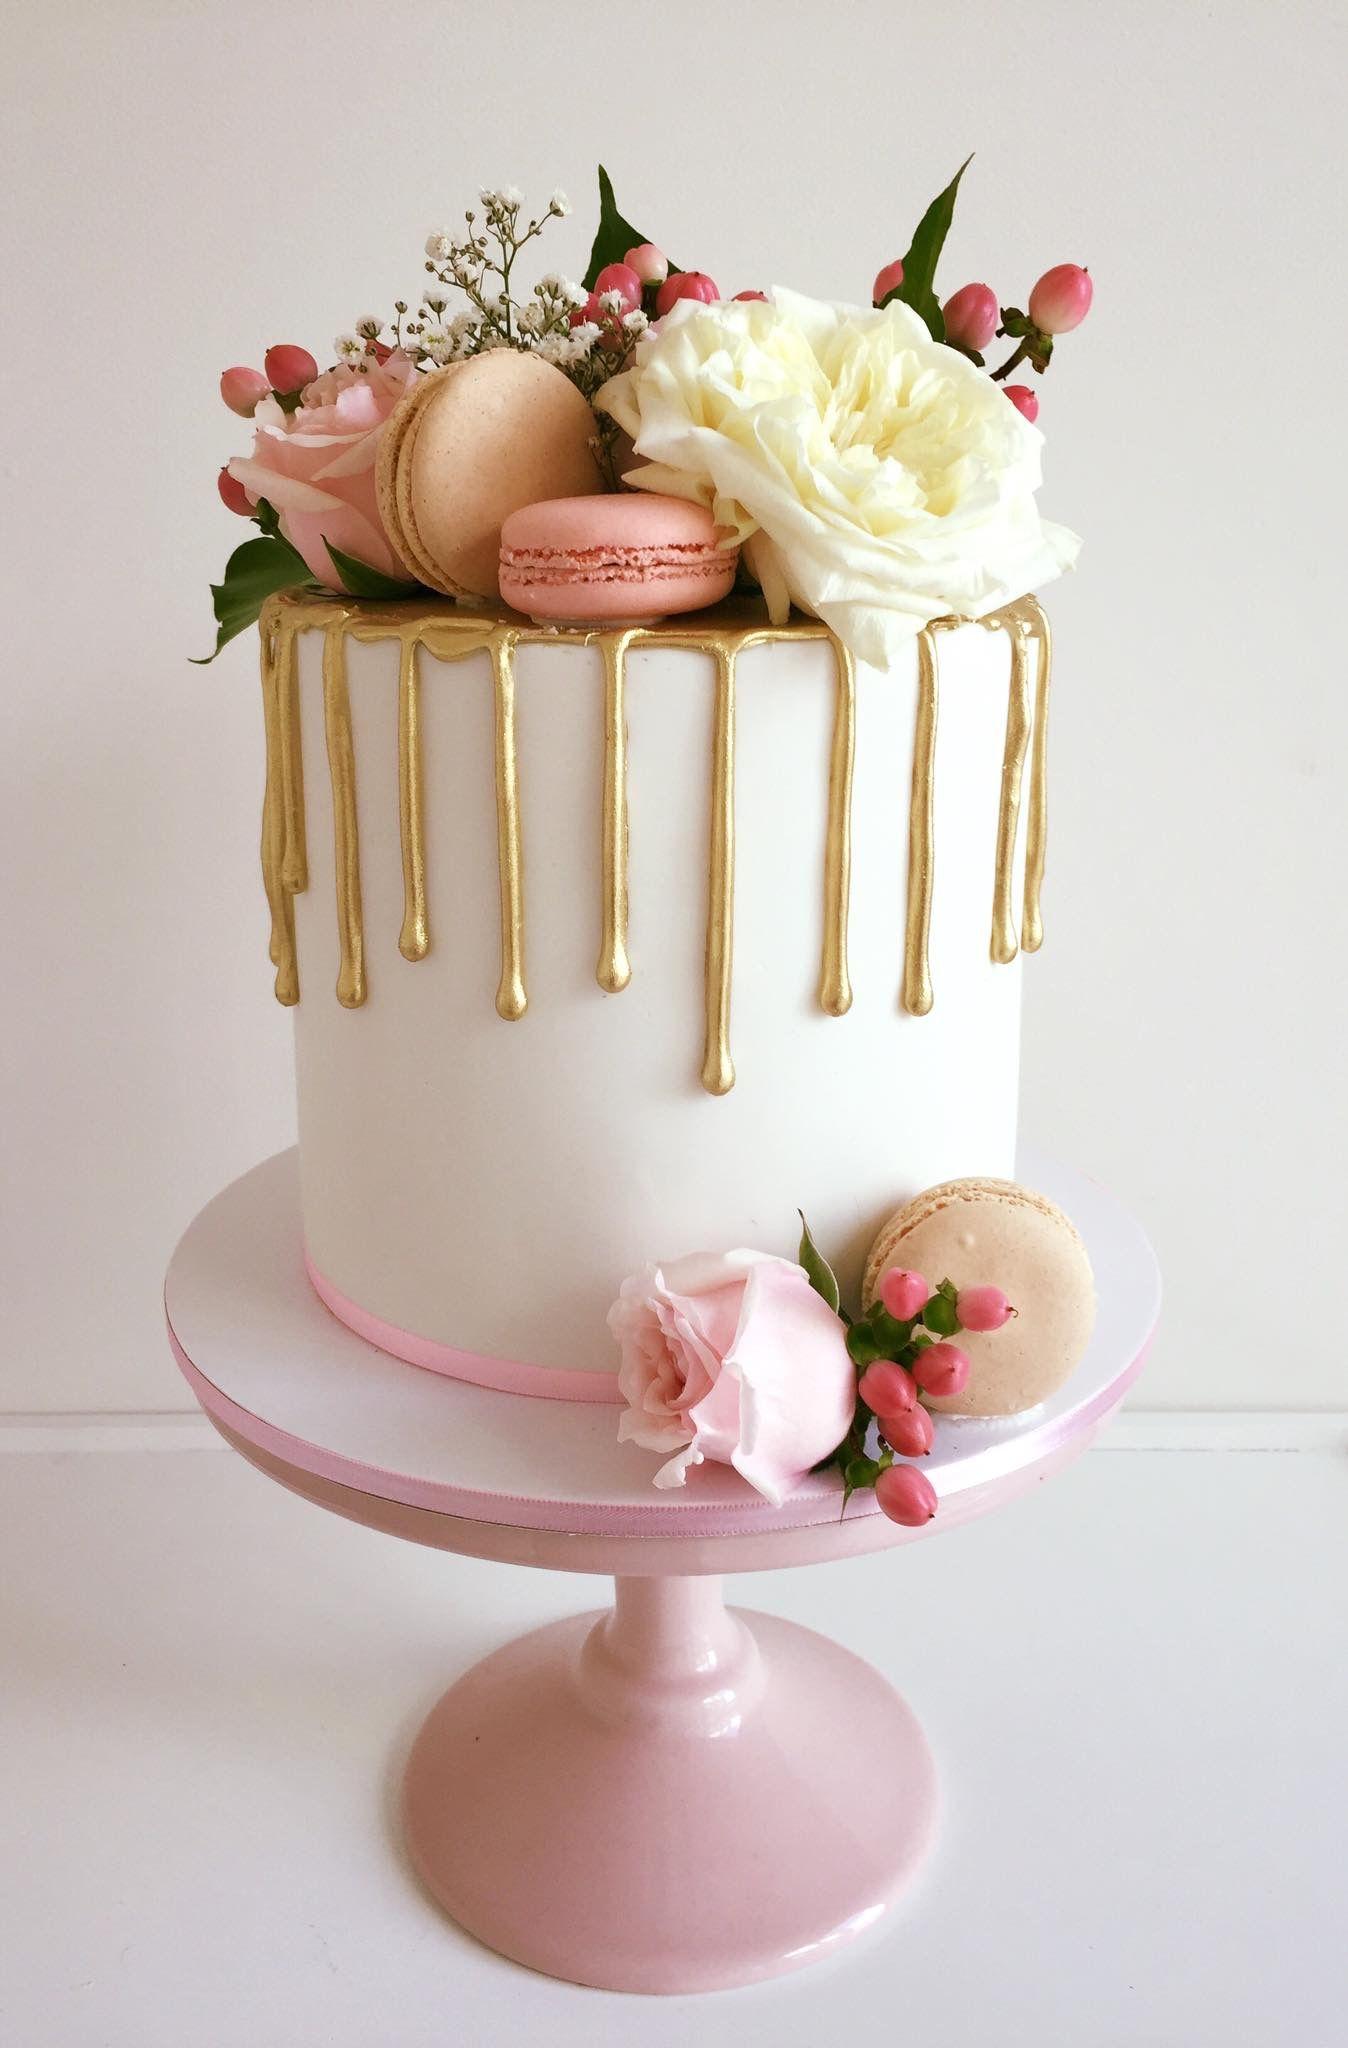 Drip Gold and White Logo - 36 Drip Wedding Cakes Almost Too Pretty To Eat | Pink cake | Cake ...